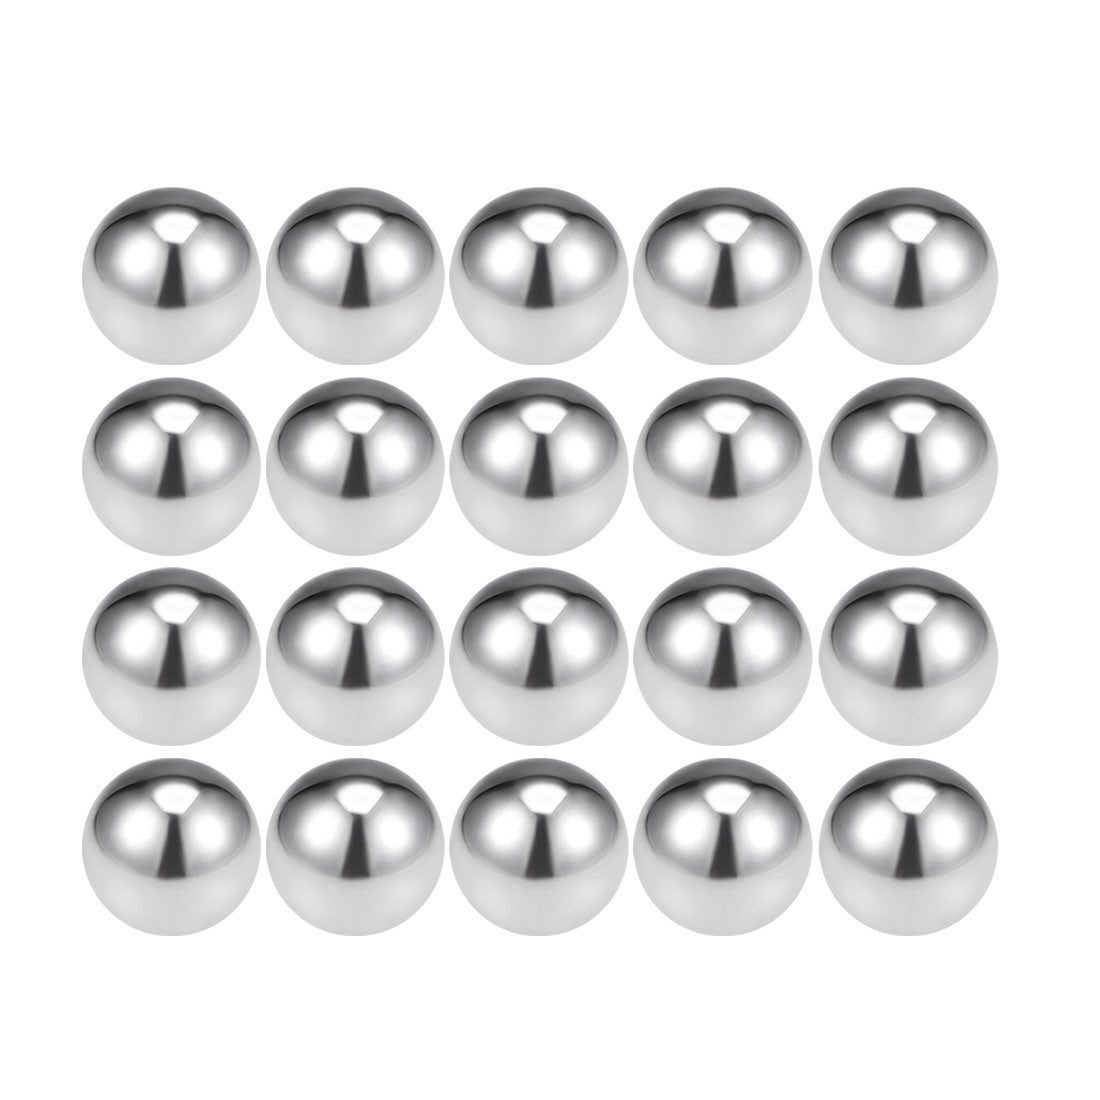 uxcell Uxcell 6mm Bearing Balls 316L Stainless Steel G100 Precision Balls 20pcs